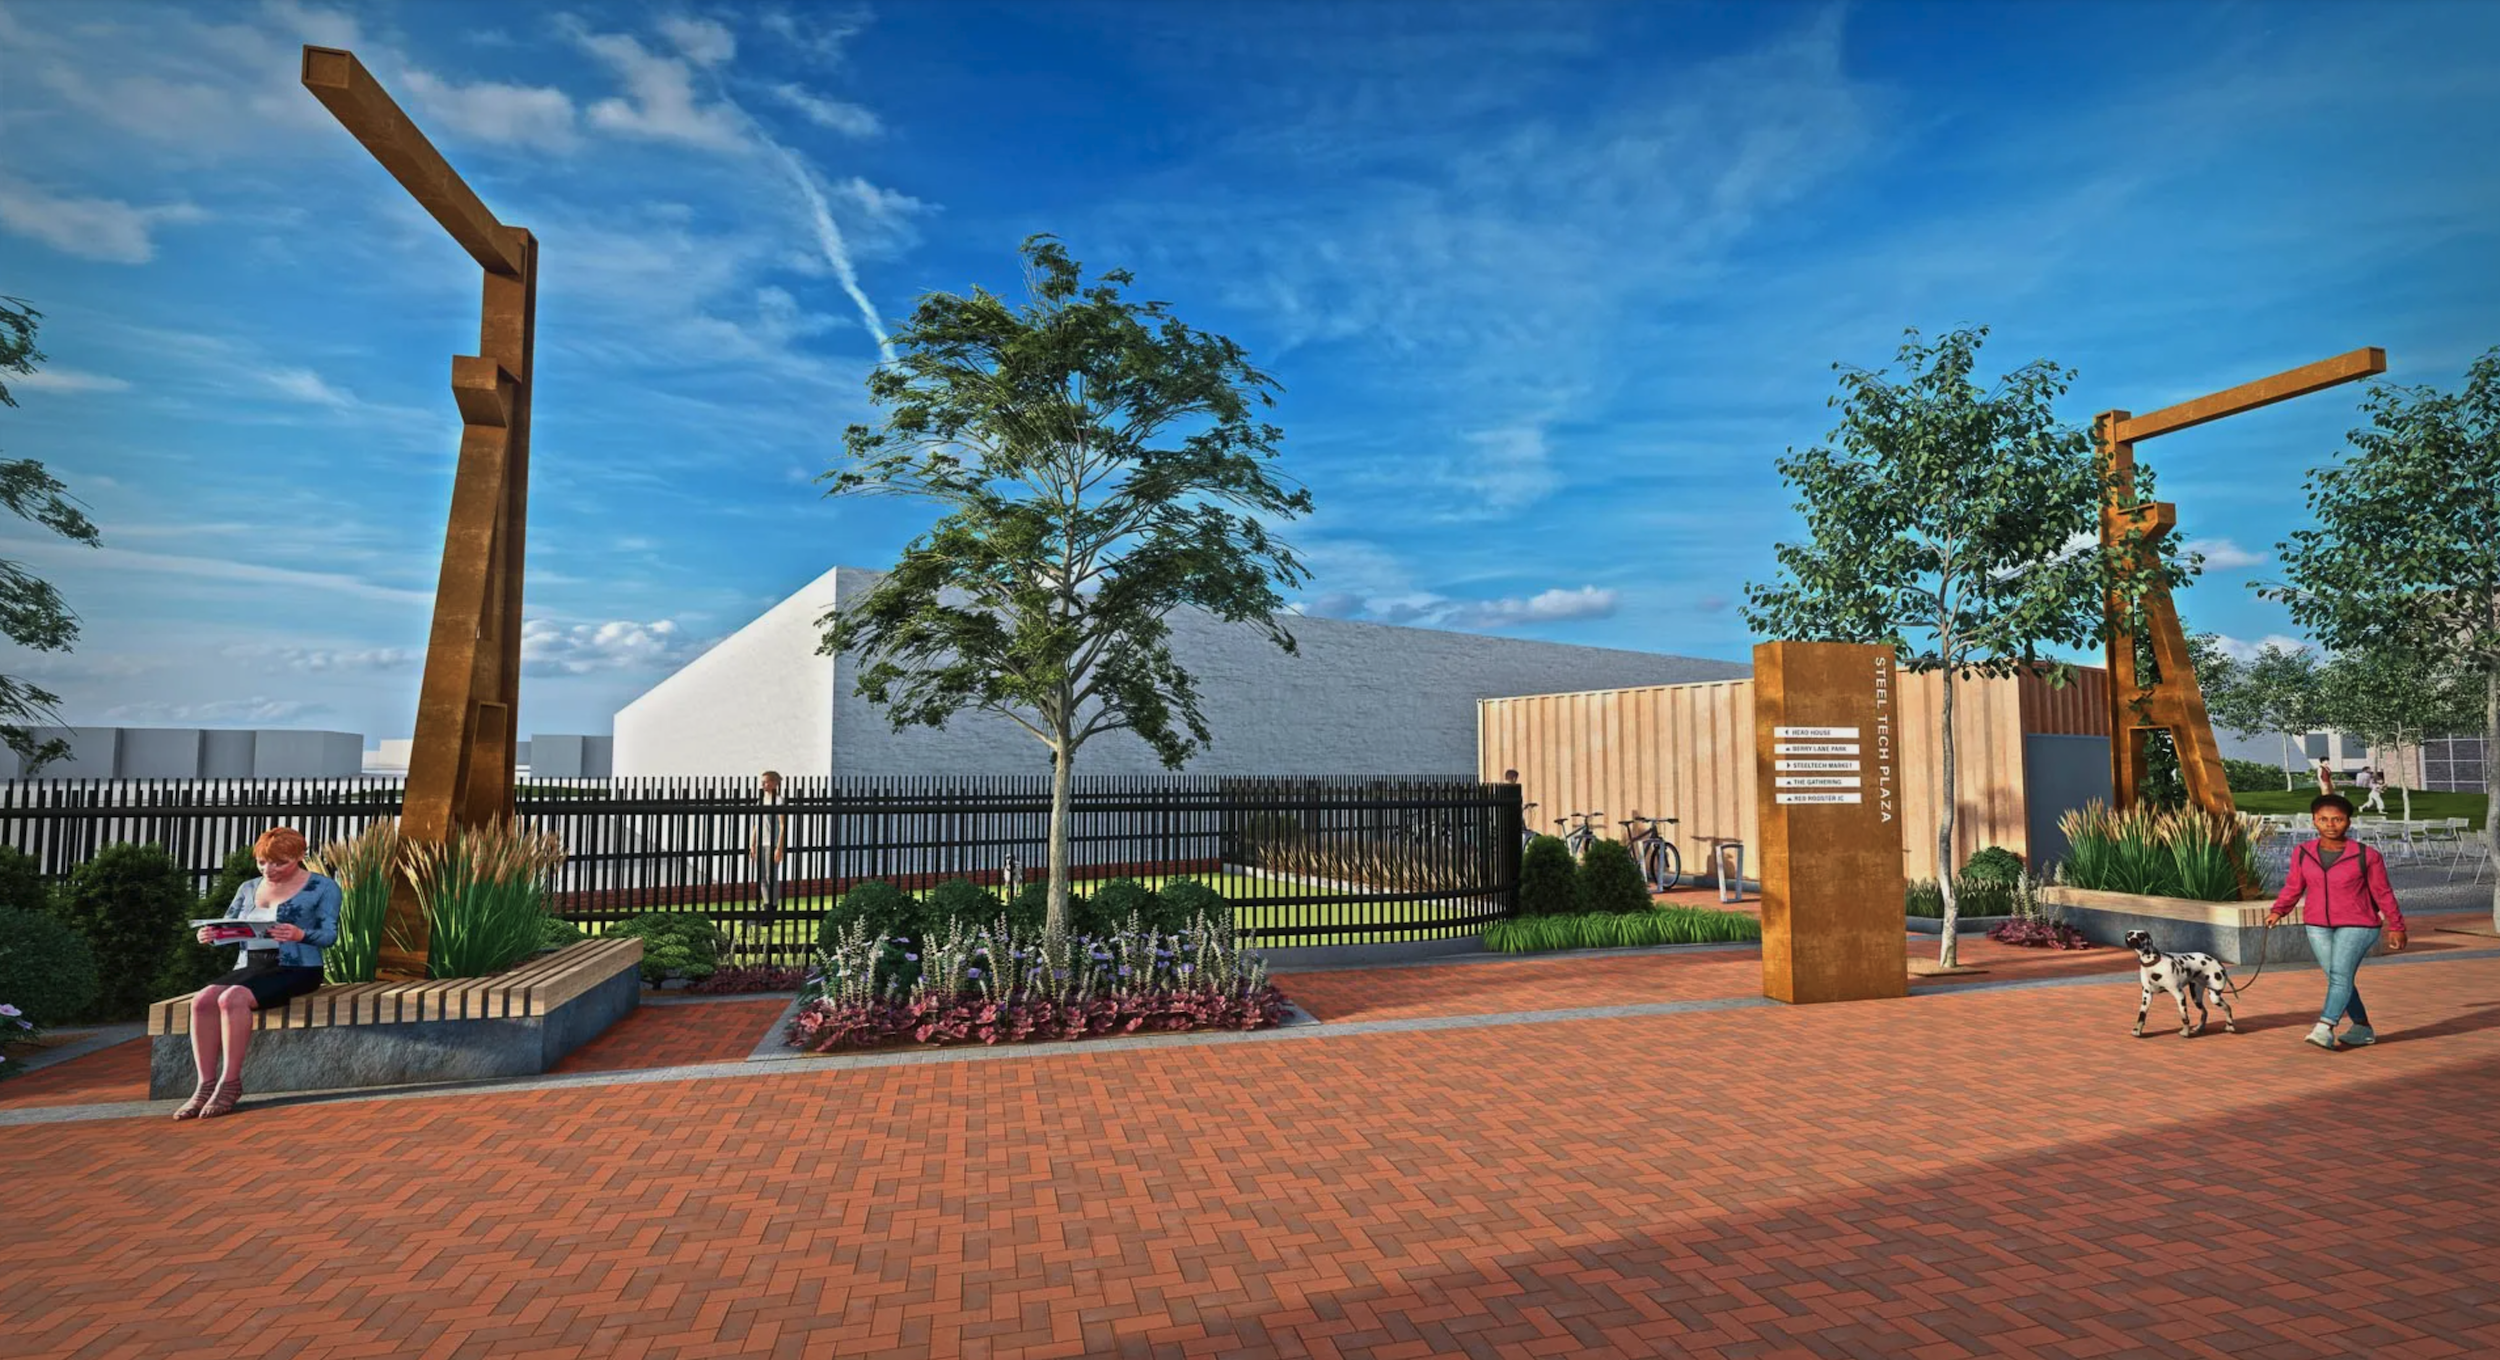 New Jersey turns a brownfield site into Steel Tech, a 3.3-acre mixed-use development